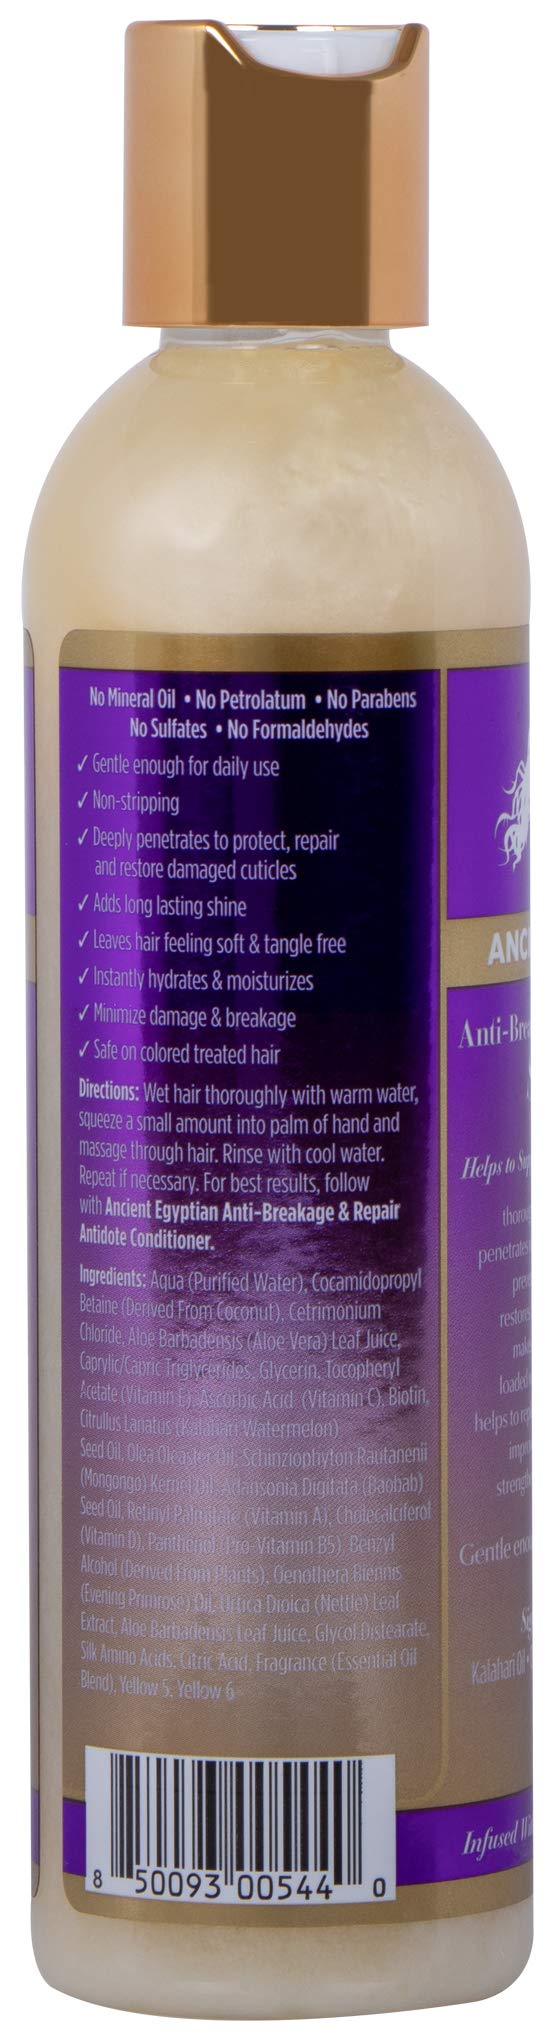 The Mane Choice Ancient Egyptian Anti-Breakage Collection Shampoo